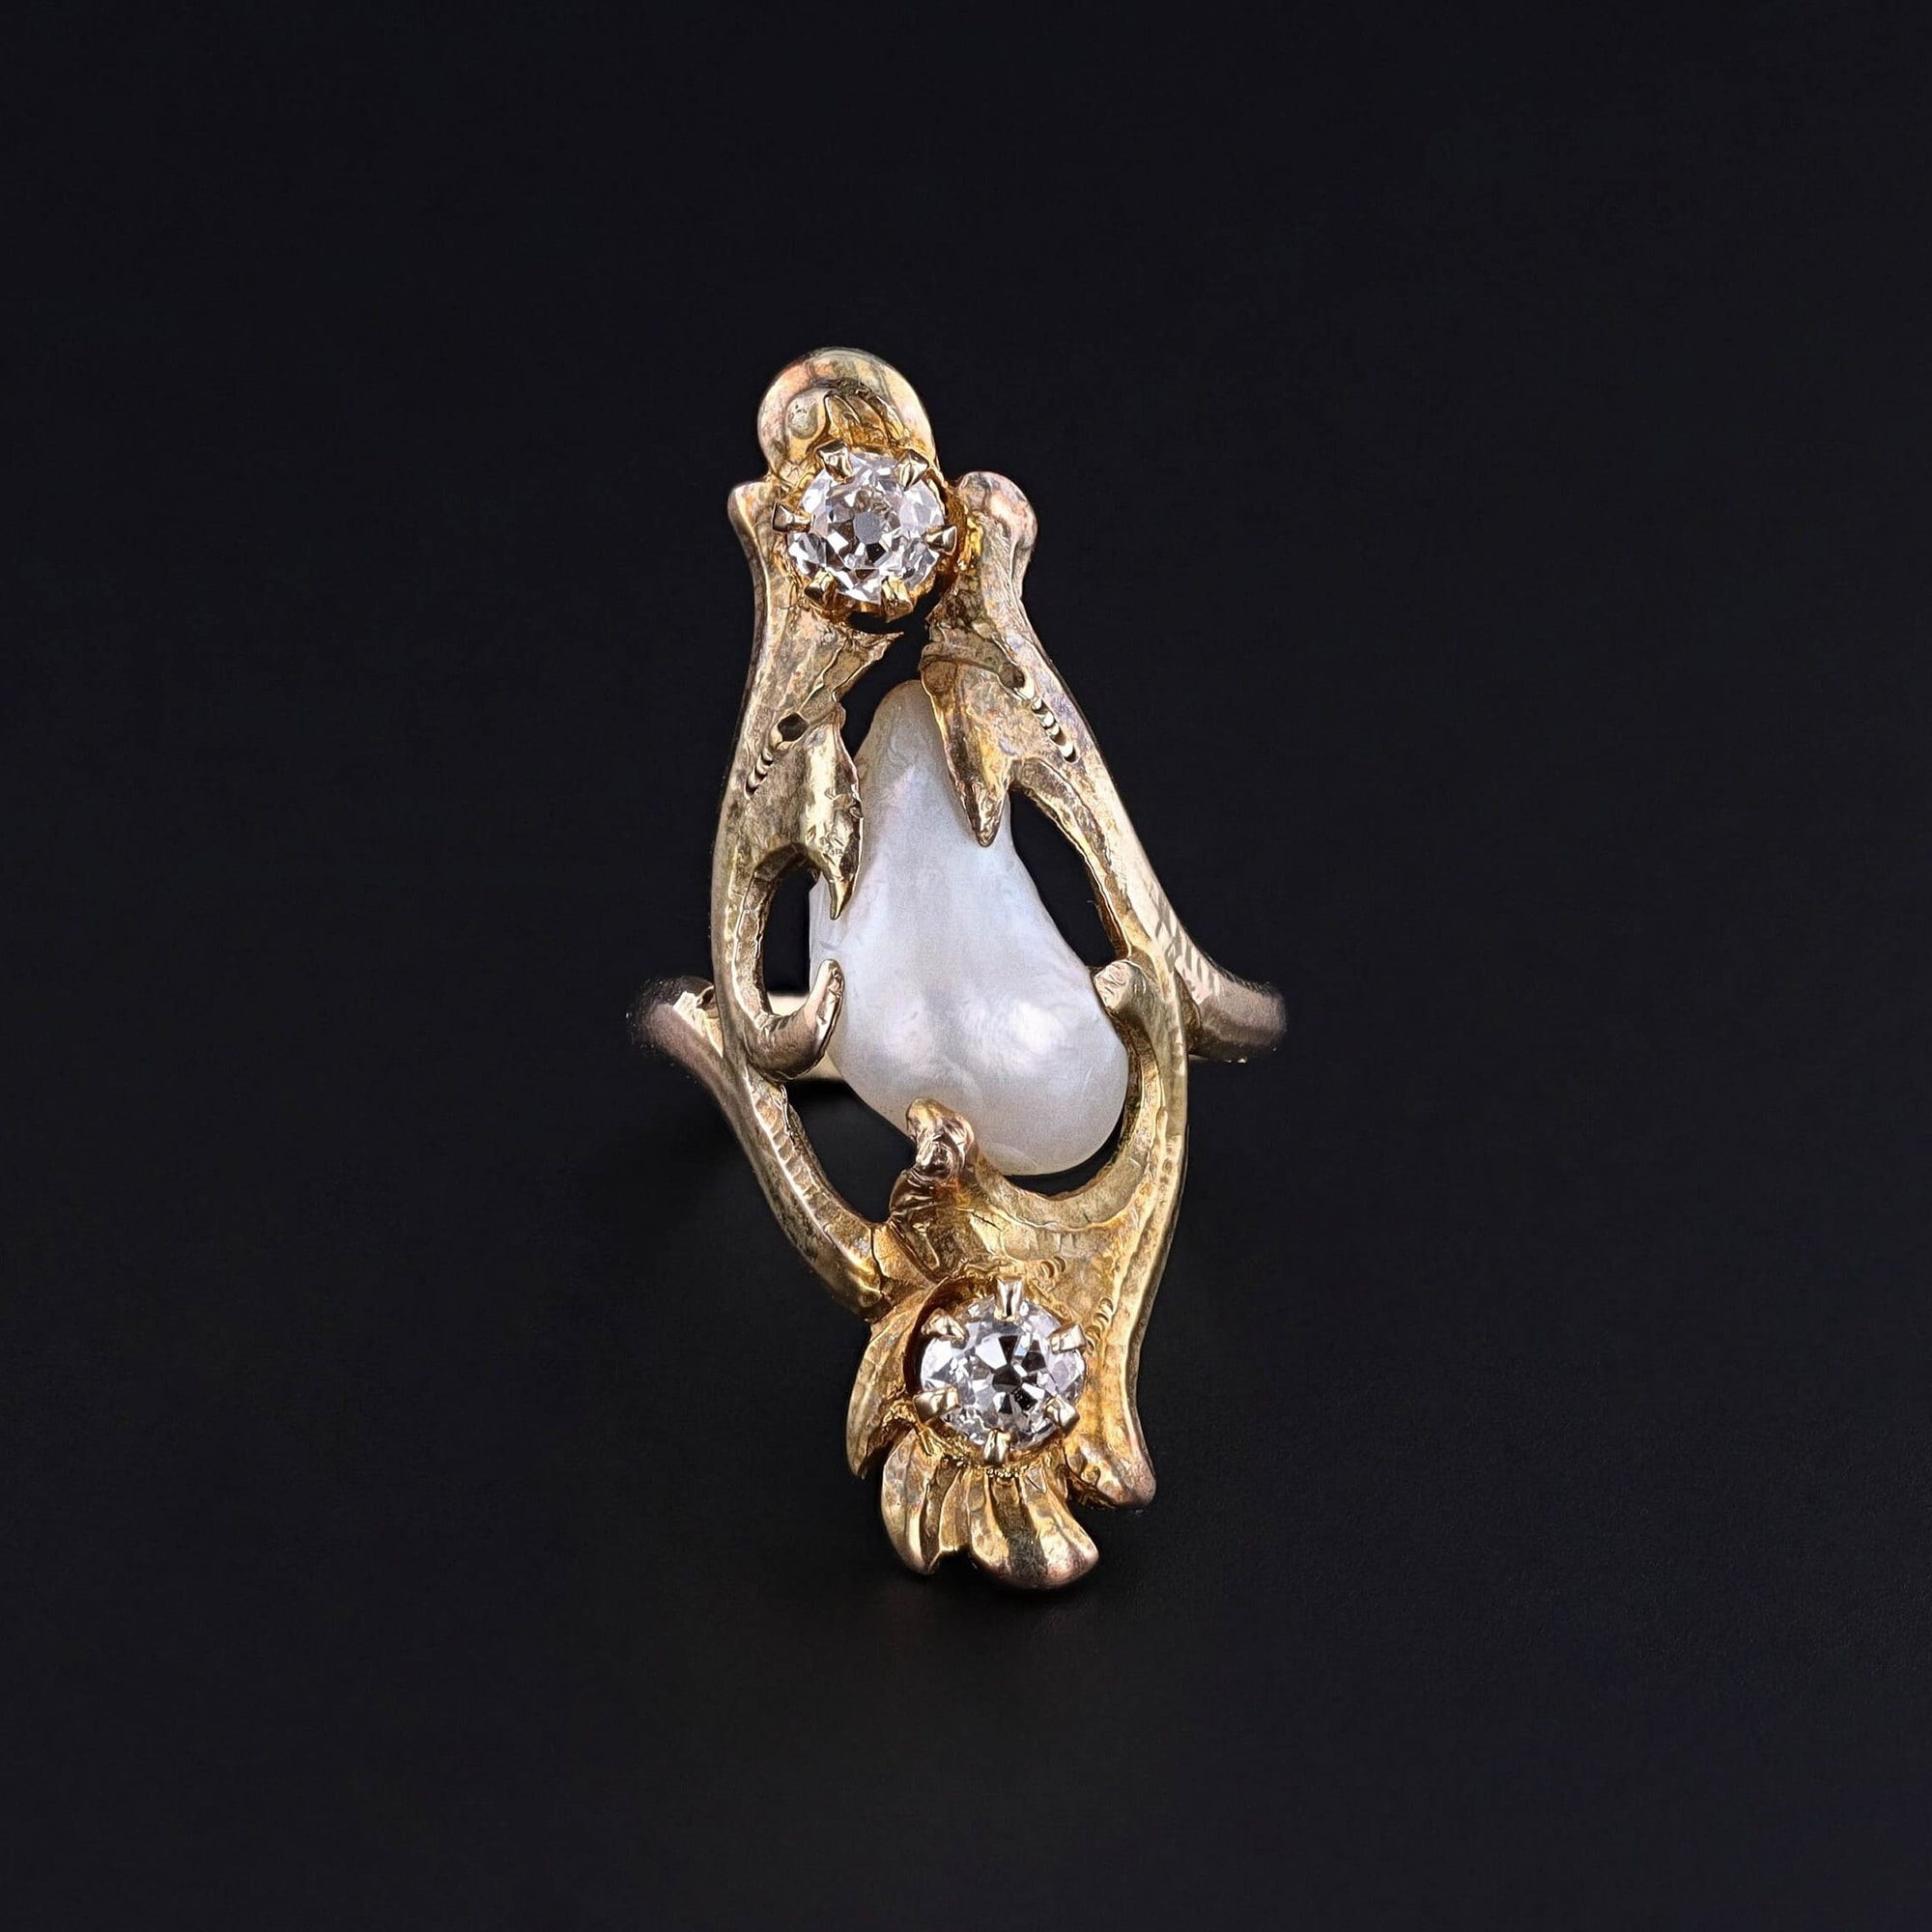 Antique Pearl and Diamond Ring of 10k Gold